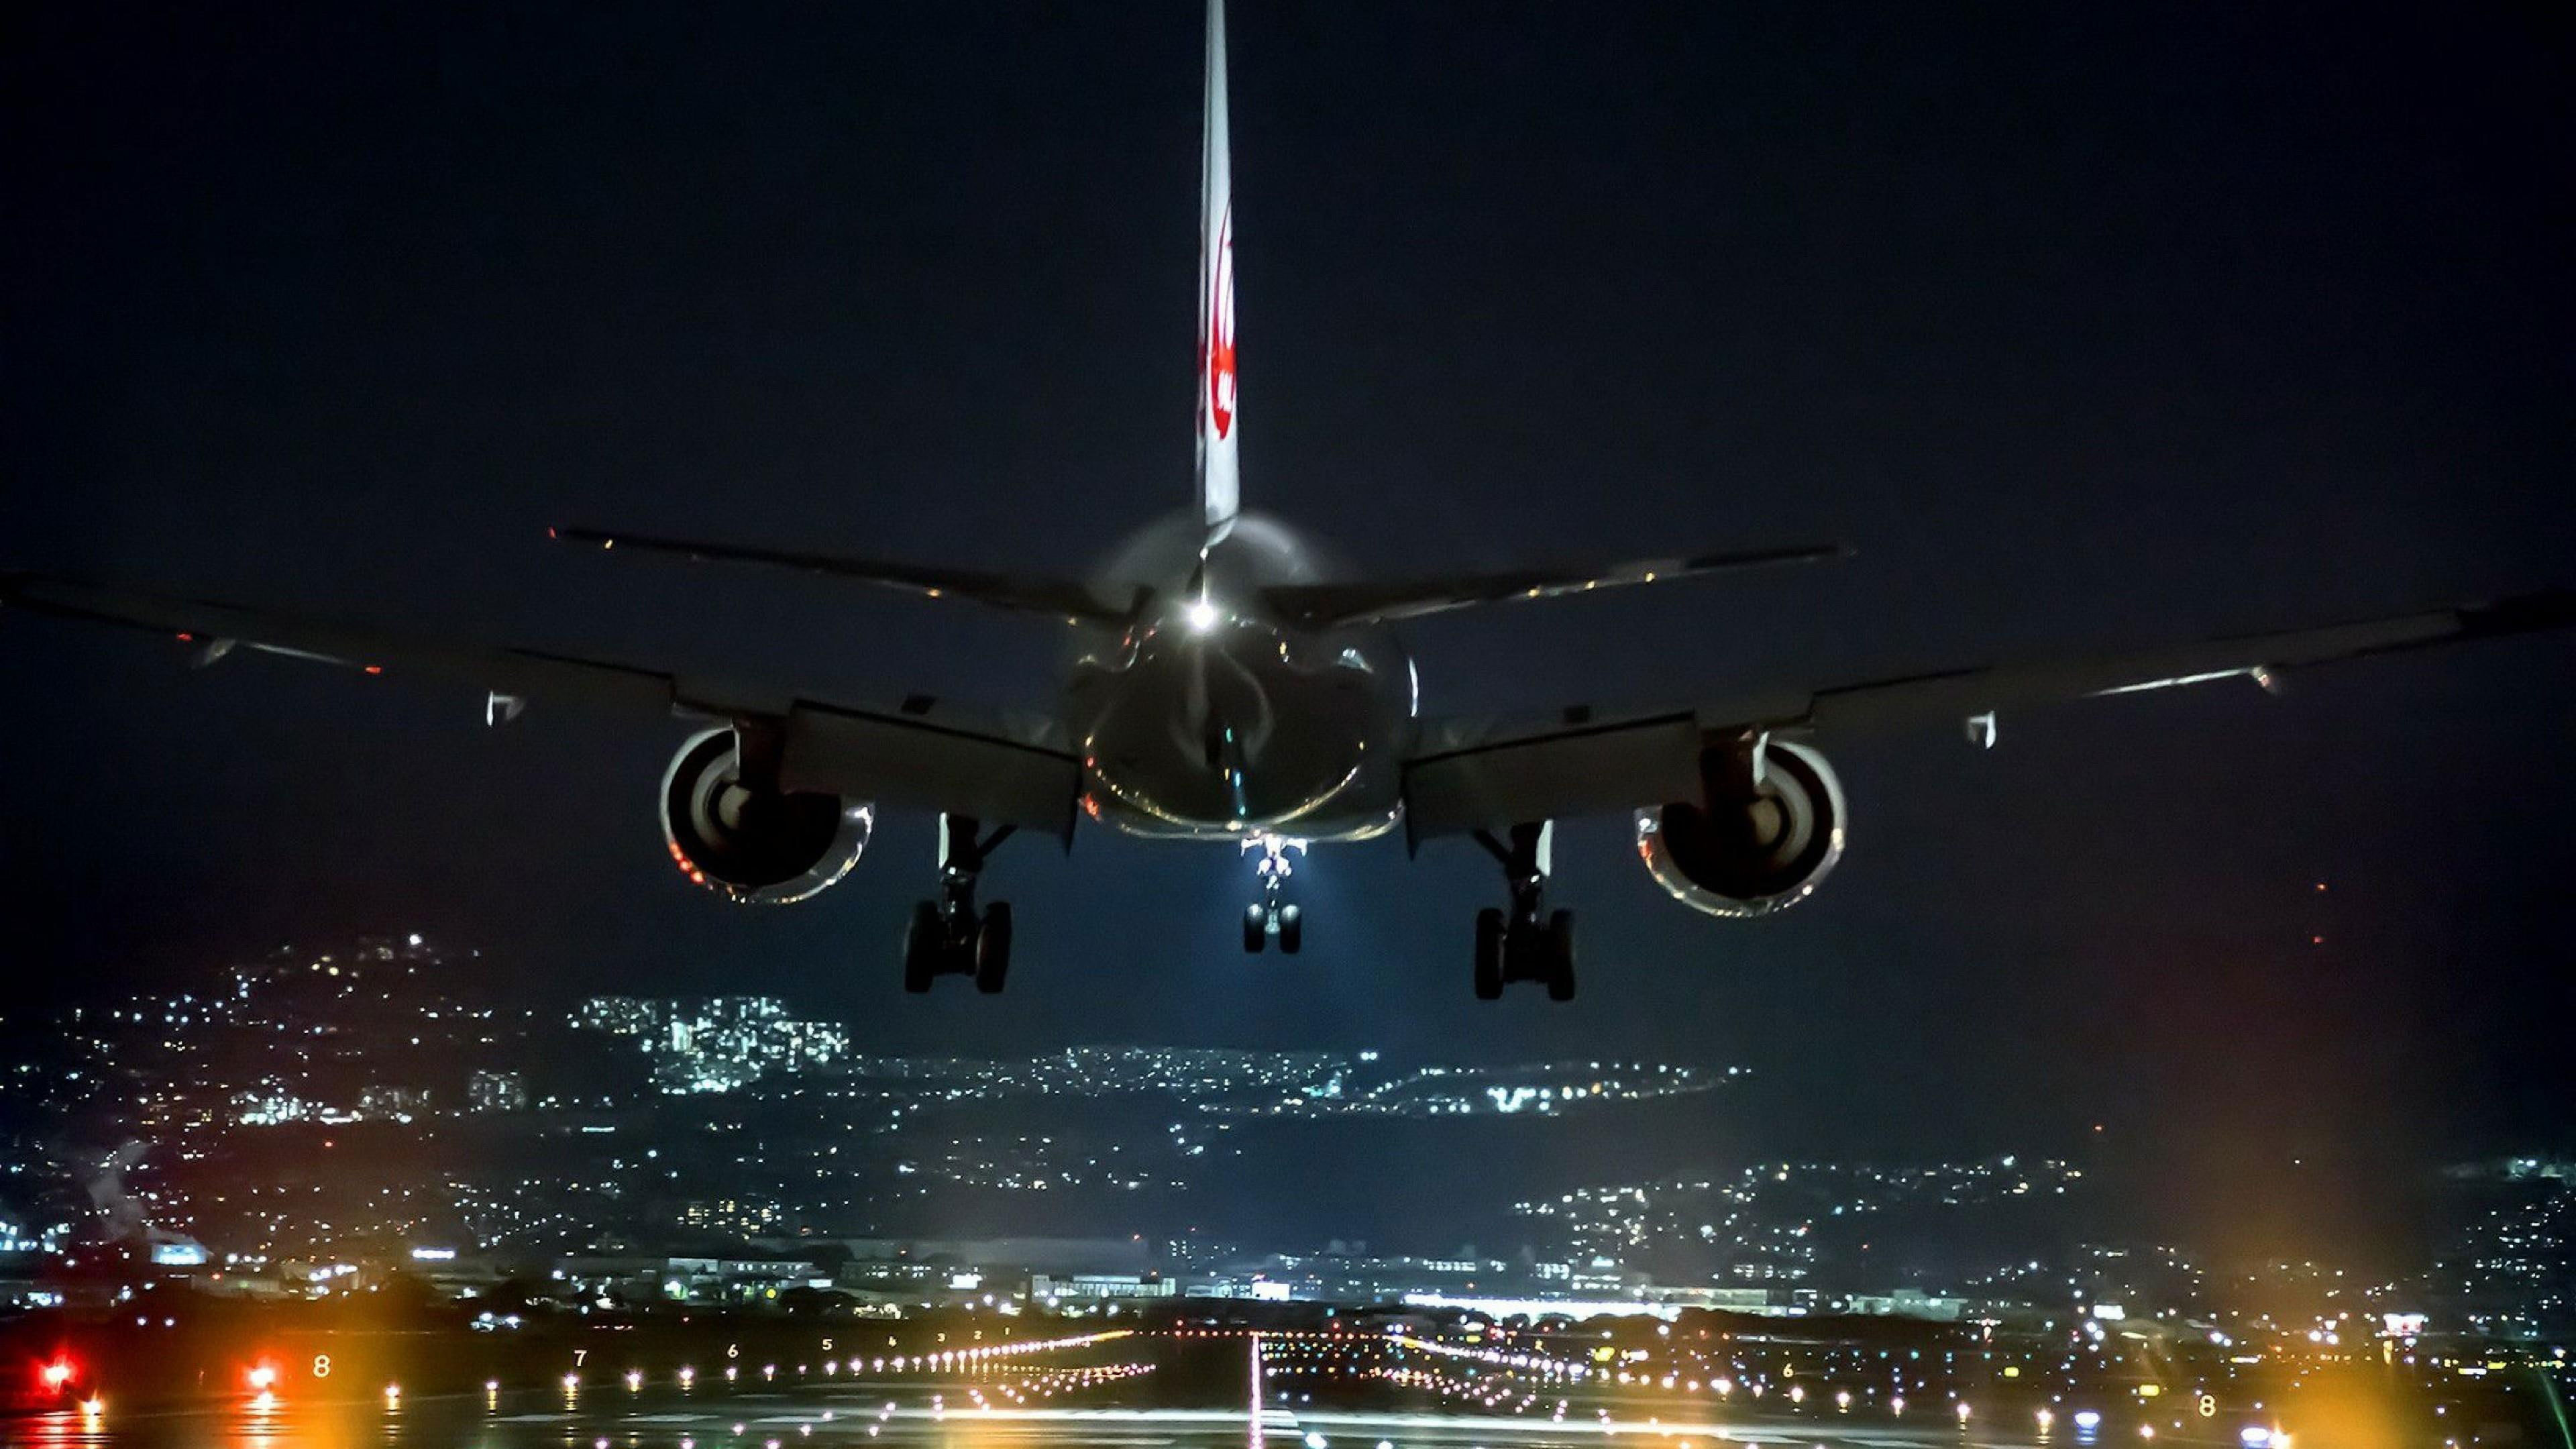 Wallpaper Airplane, Night, Flight, Airline, Air Travel, Air Travel, Other